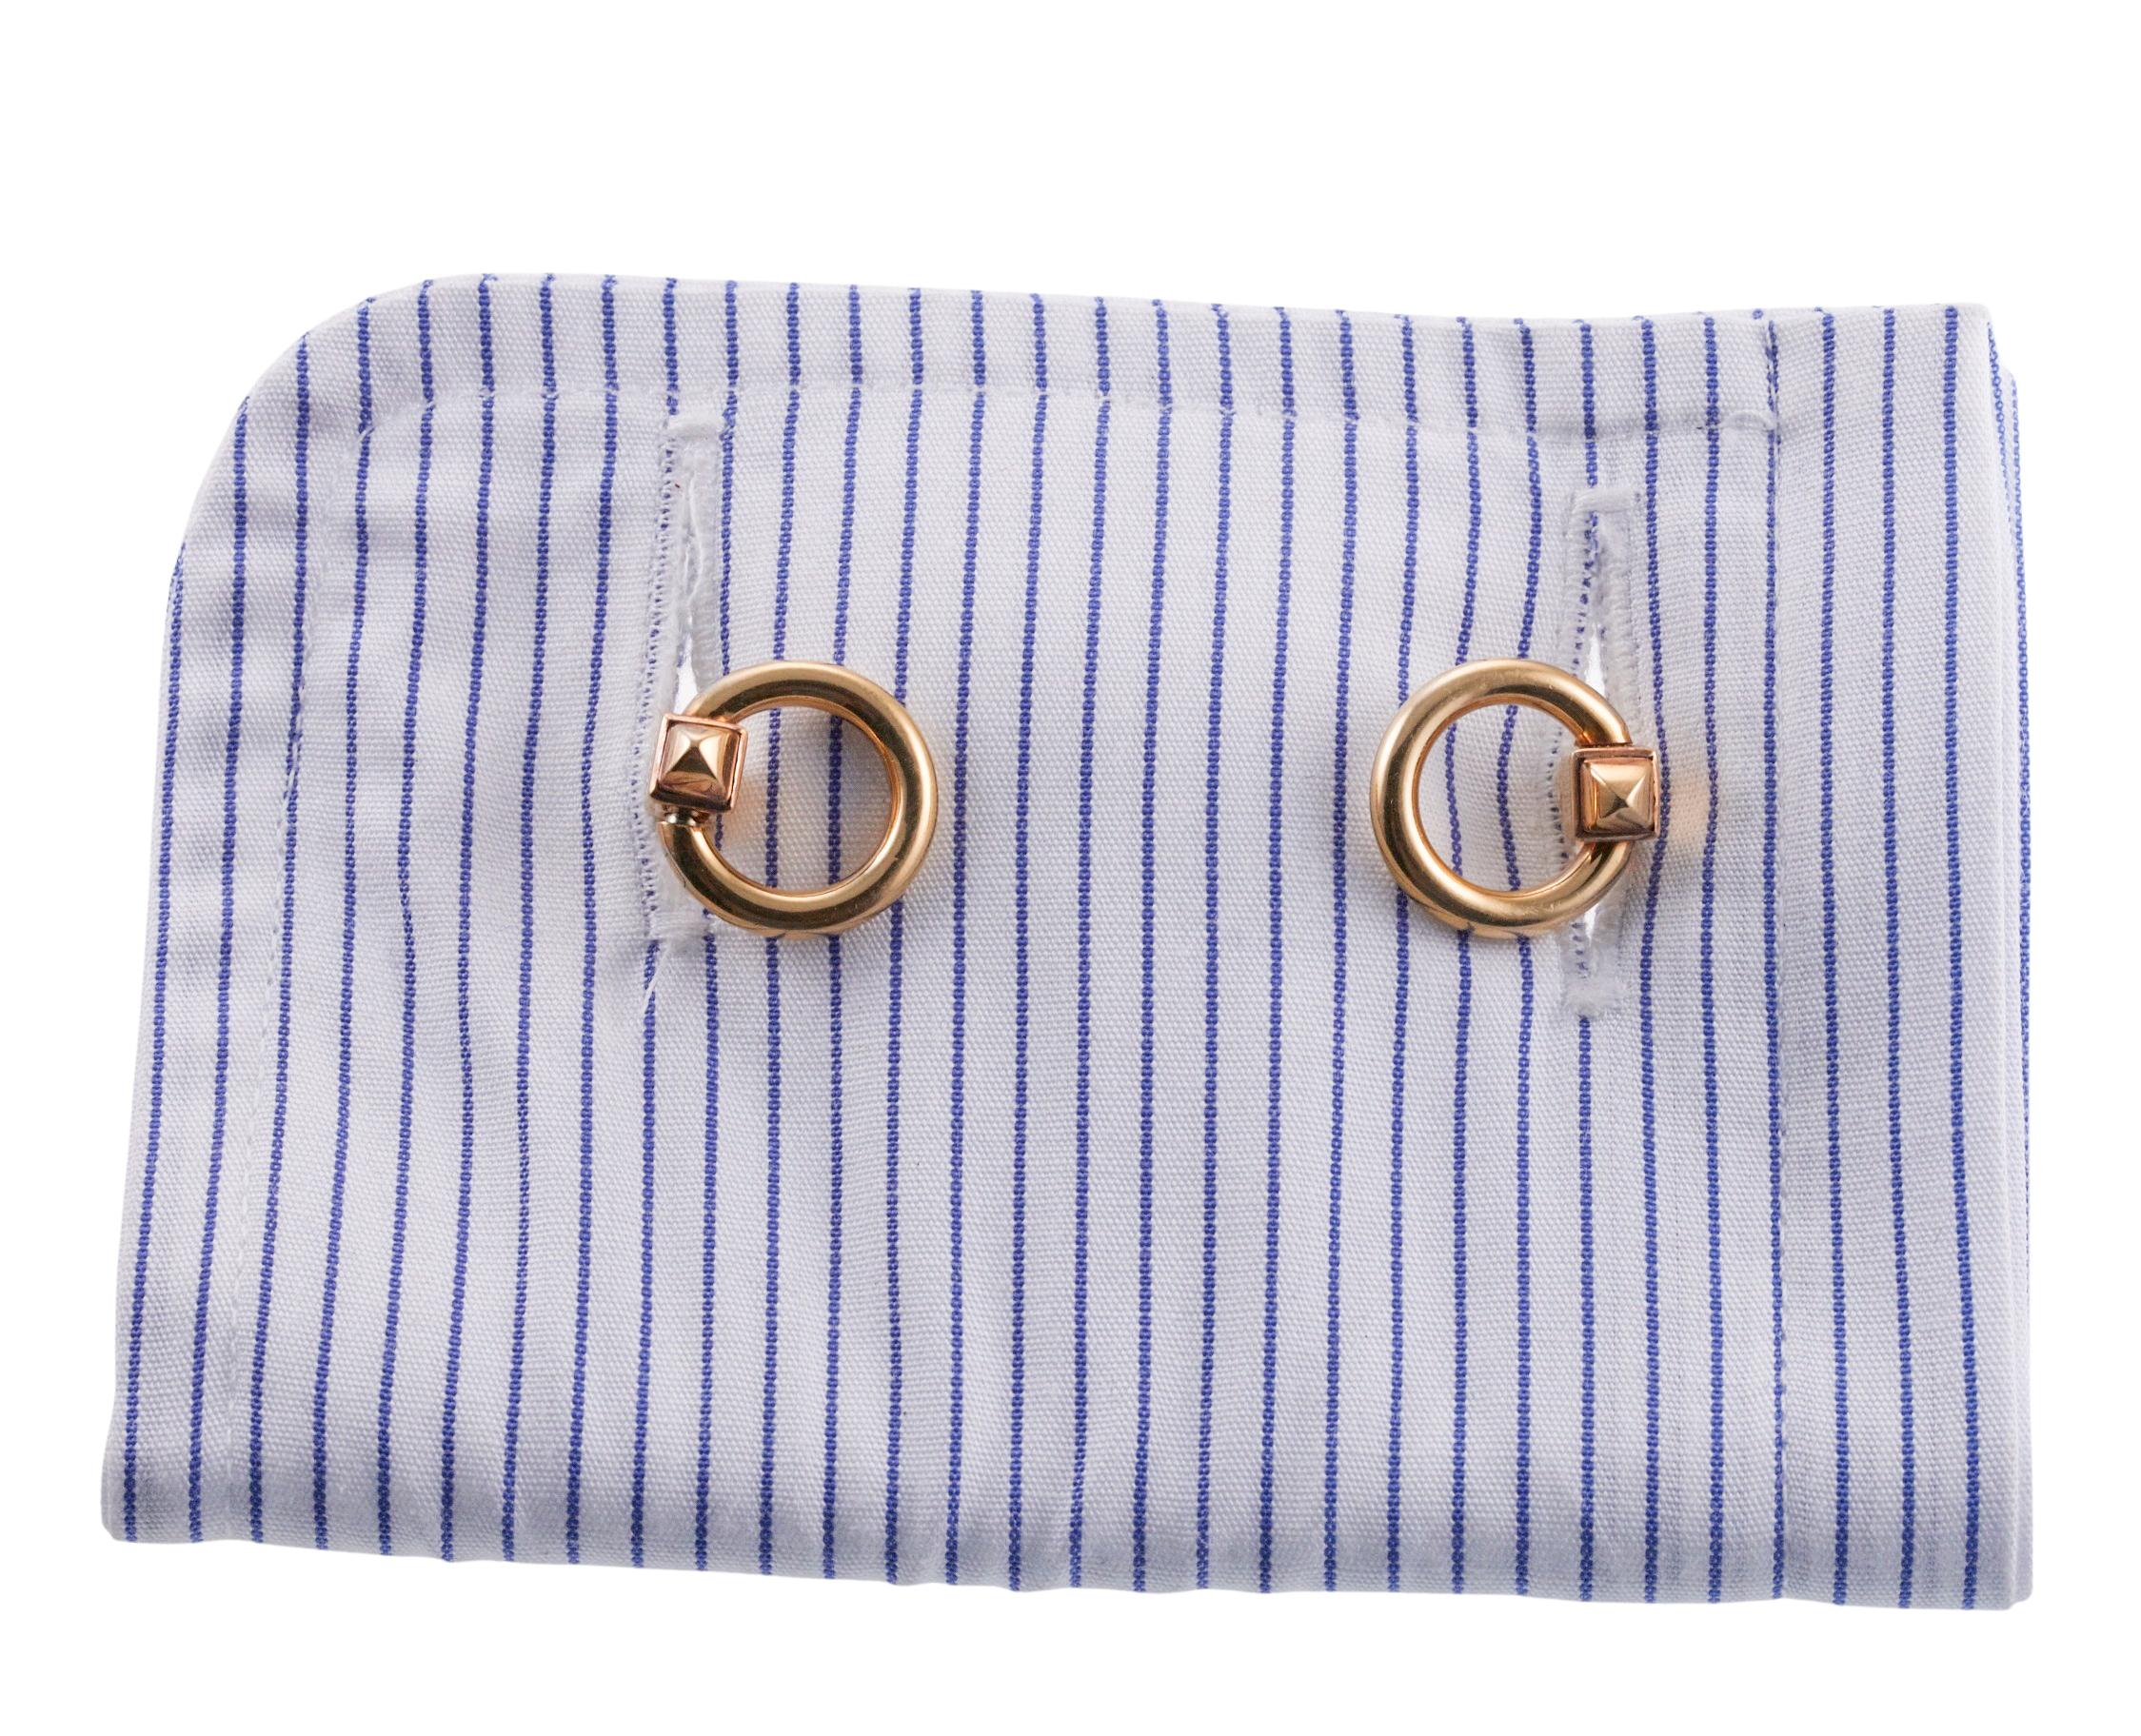 Pair of 18k gold Cartier Paris Retro cufflinks, each top measures 15mm in diameter. Set comes in original Cartier box - damage consistent with age. Cufflinks are hallmarked with Eagle head French mark, Cartier Paris. Weight - 12.4 grams.